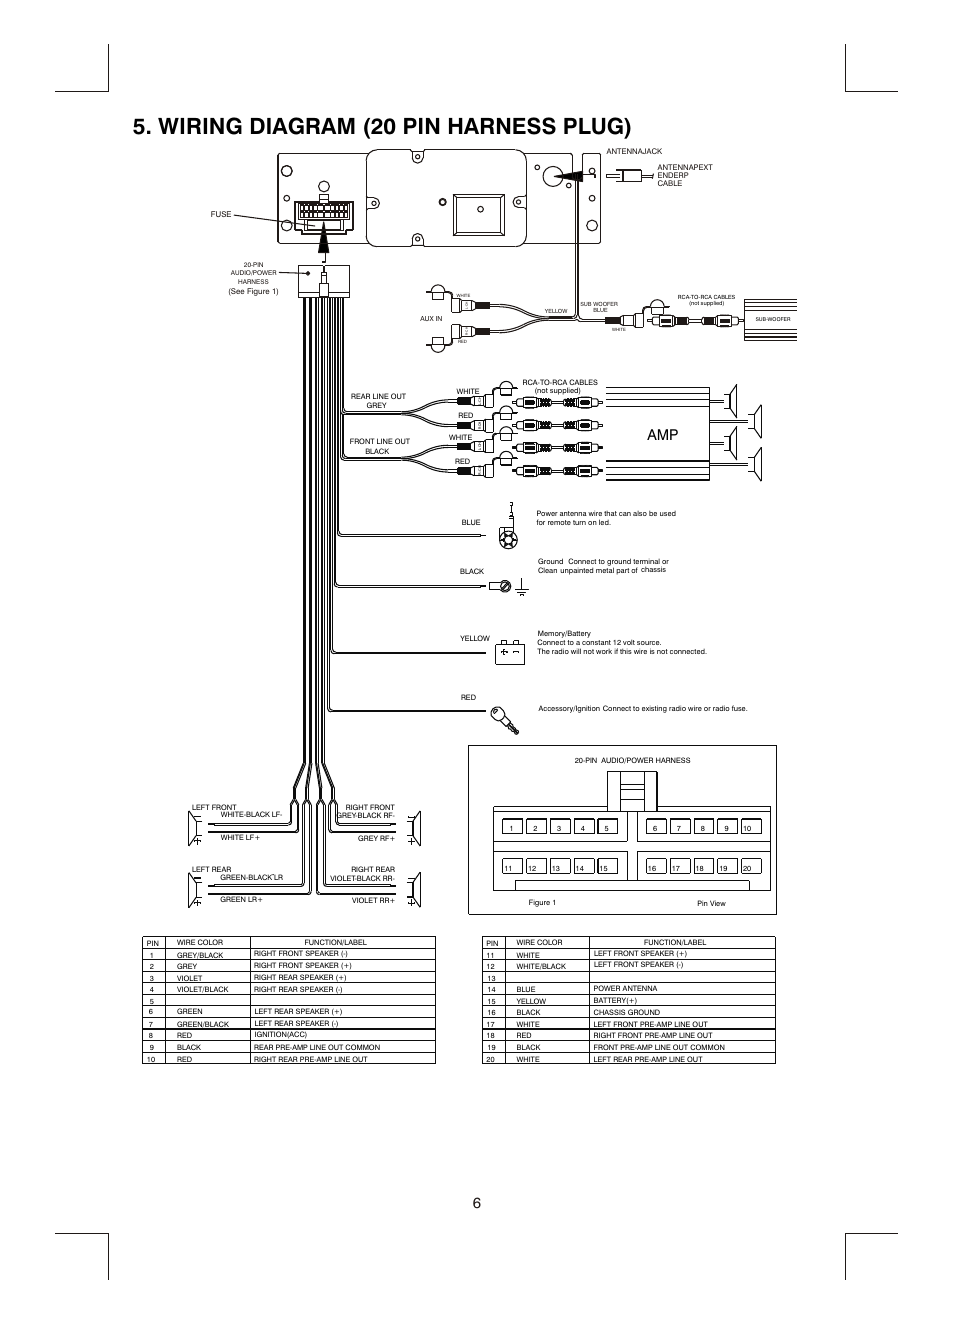 Wiring diagram (20 pin harness plug) | Boss Audio Systems MR1400W User  Manual | Page 7 / 14  Boss Radio Wiring Diagram    Manuals Directory